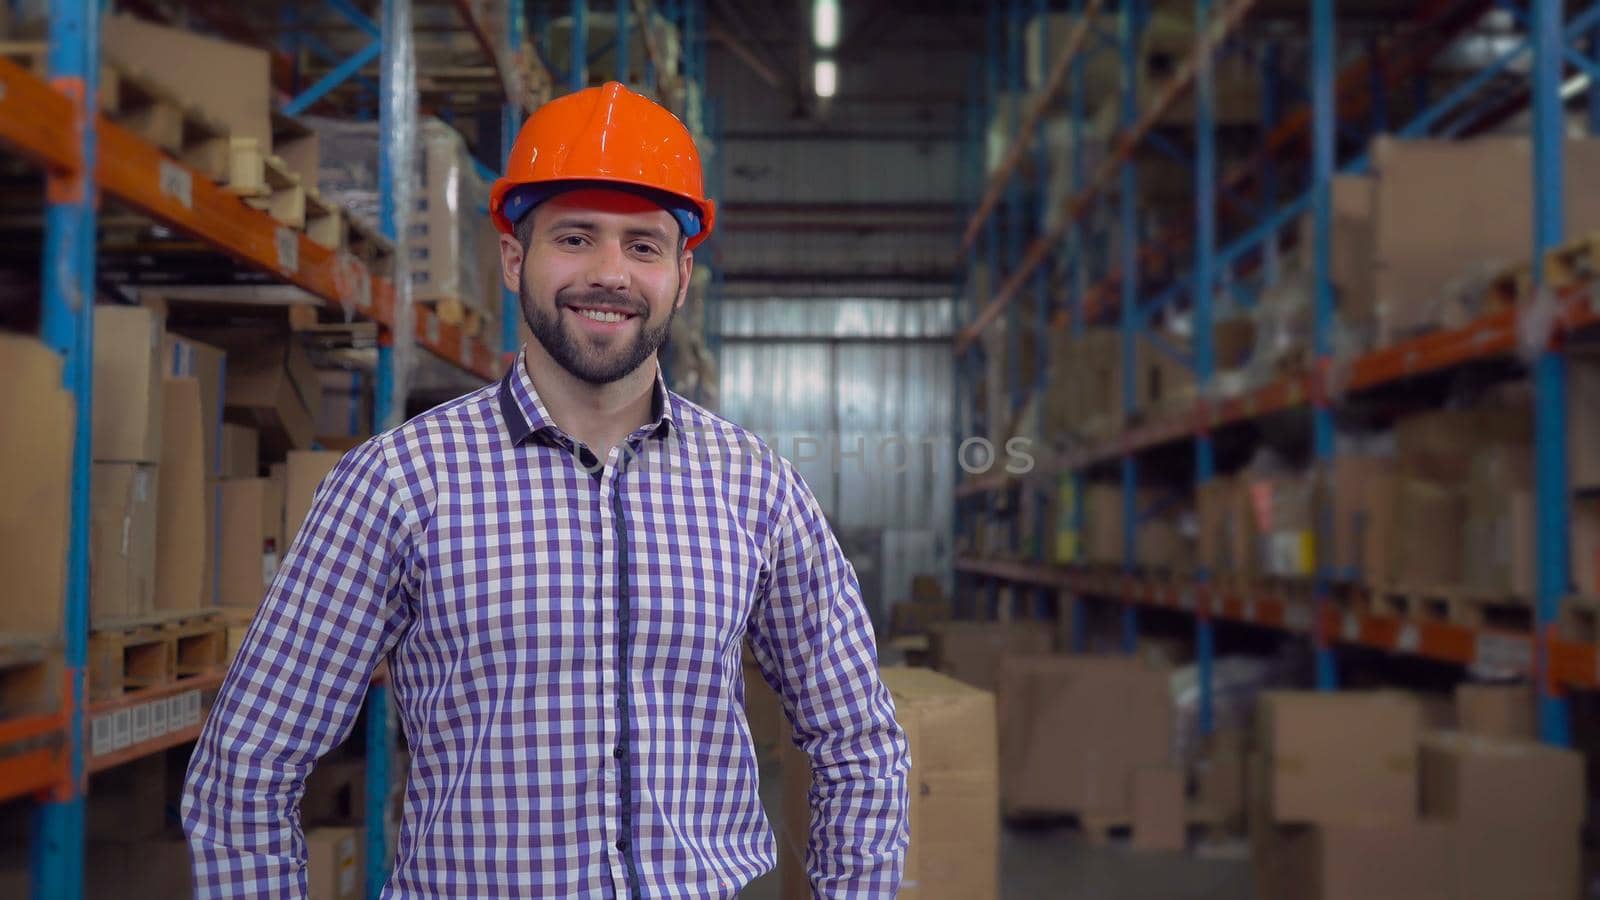 smiling manager near metal racks with boxes wearing casual shirt and orange hard hat. Portrait worker posing in warehouse at work. Happy friendly adult men with beard looking at the camera with smile.